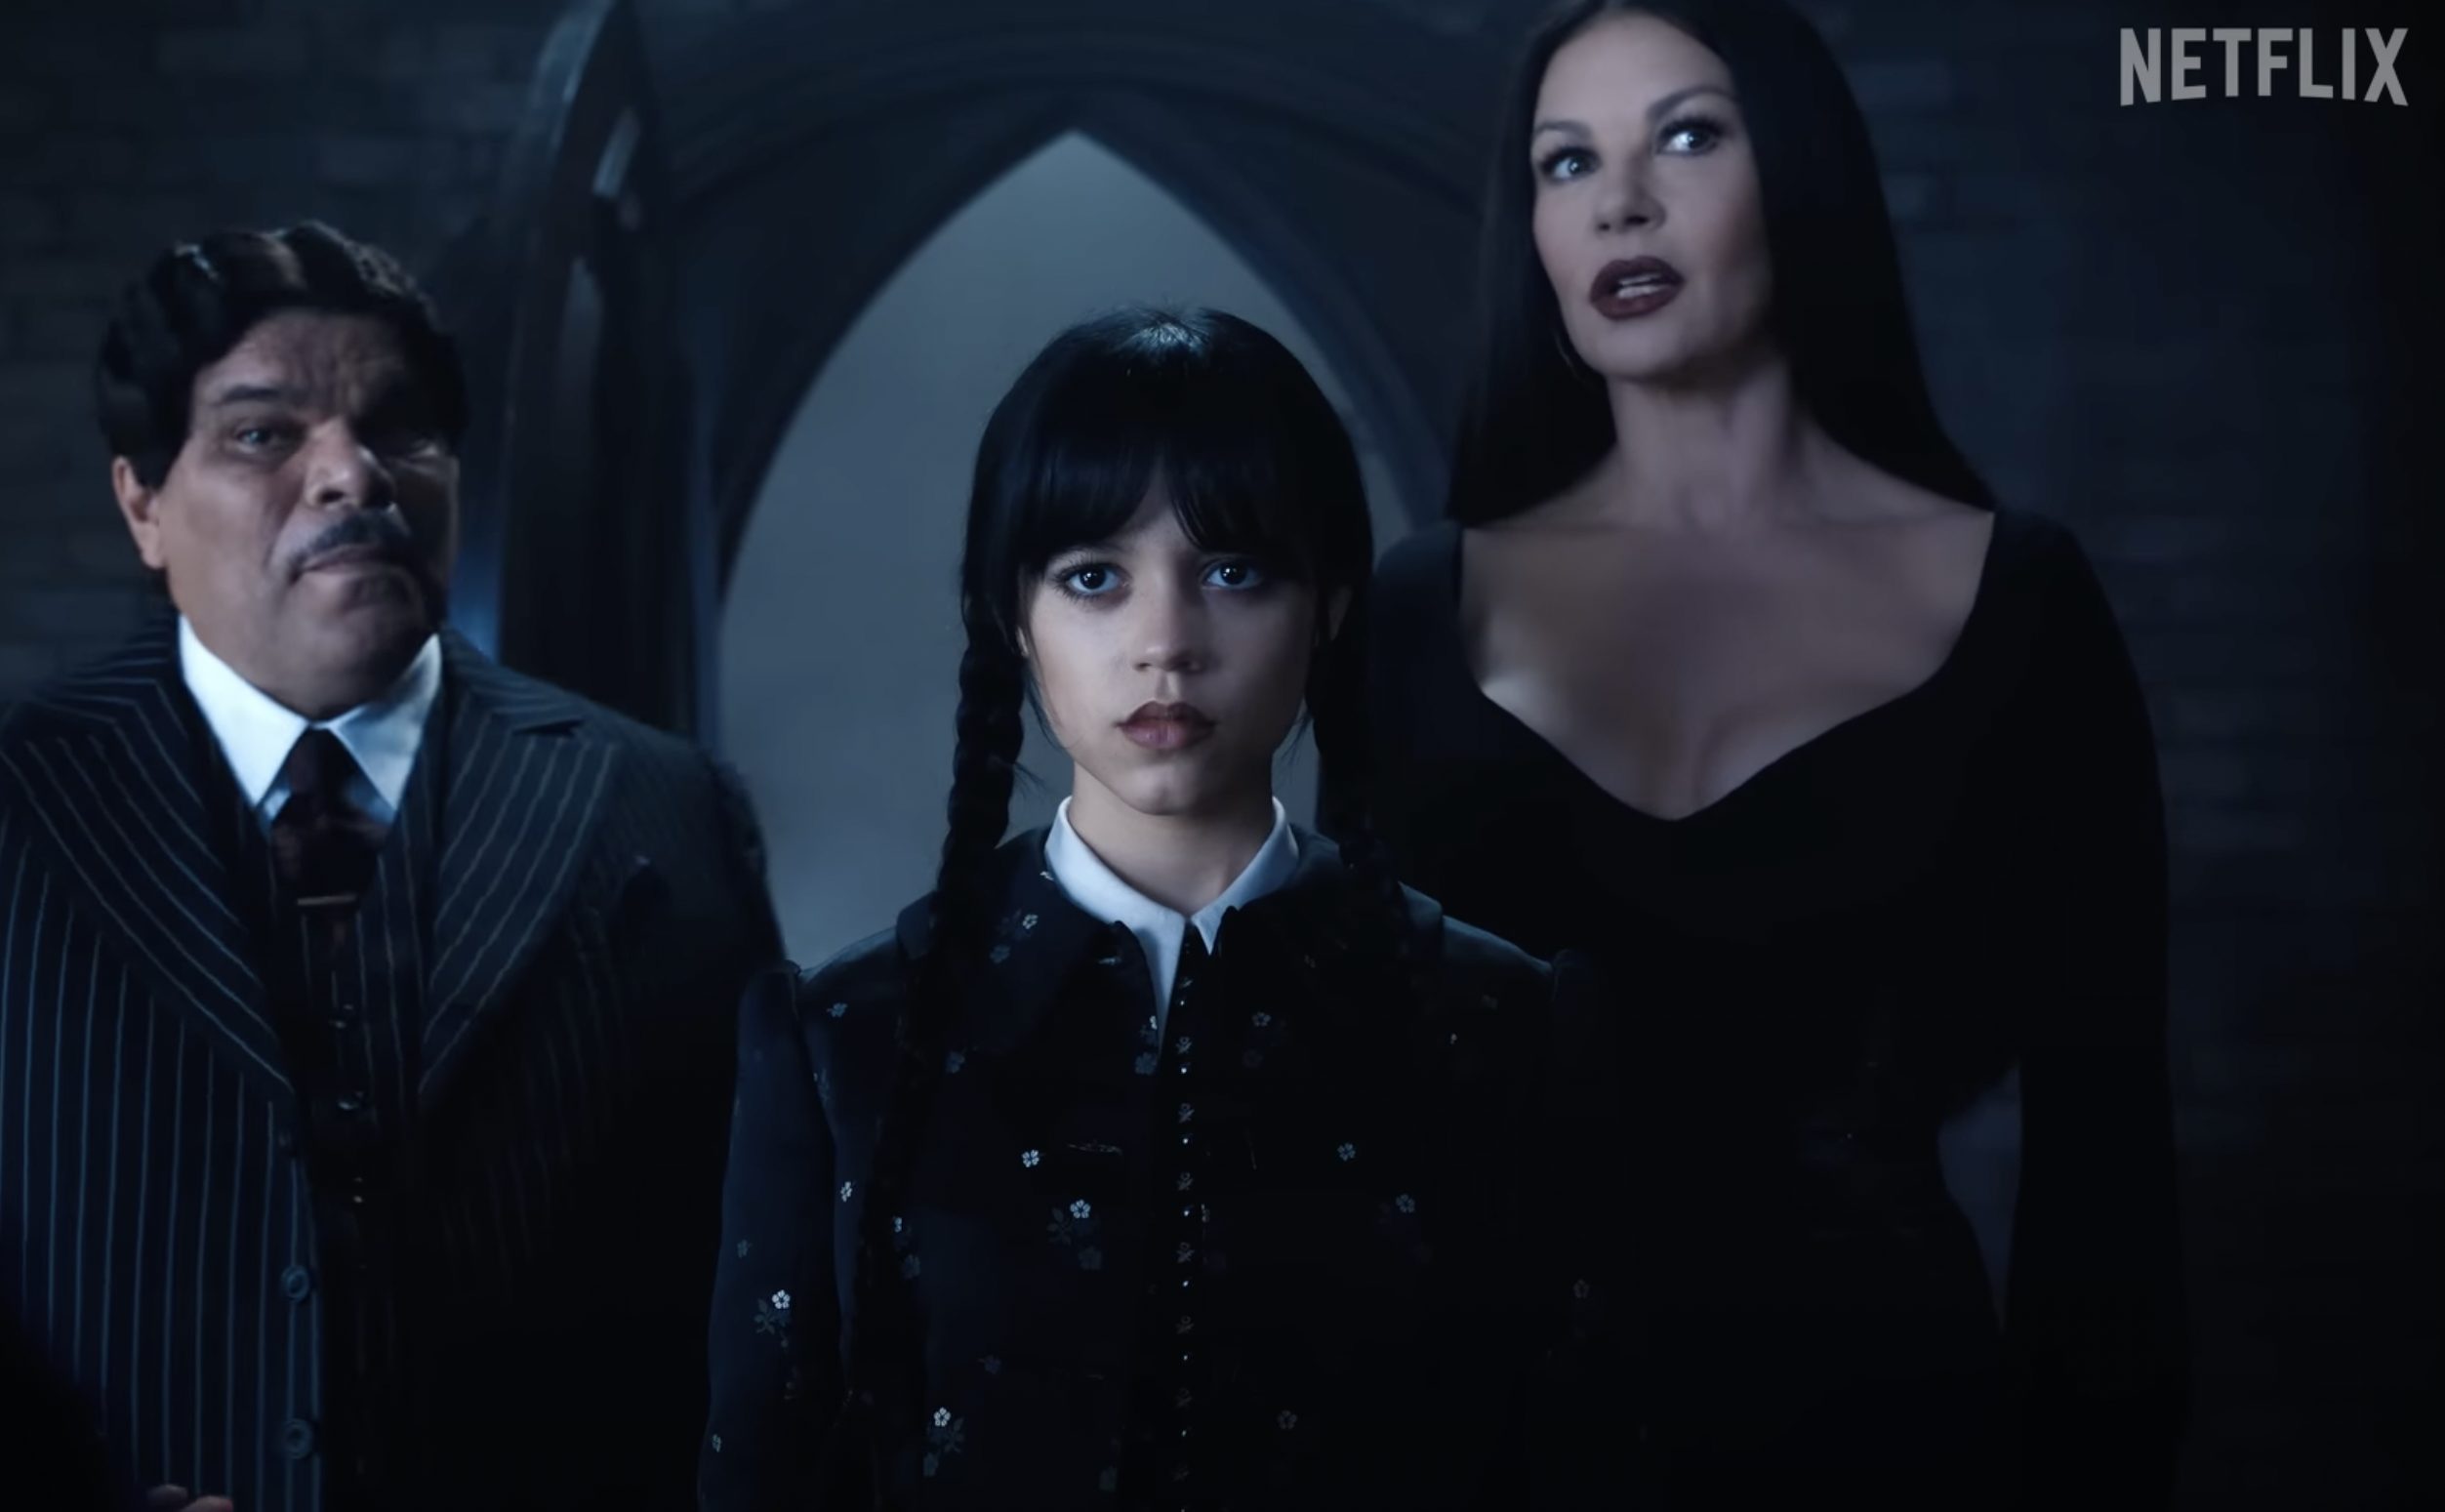 Screenshot from the trailer of the show featuring Wednesday, Morticia and Gomez Addams